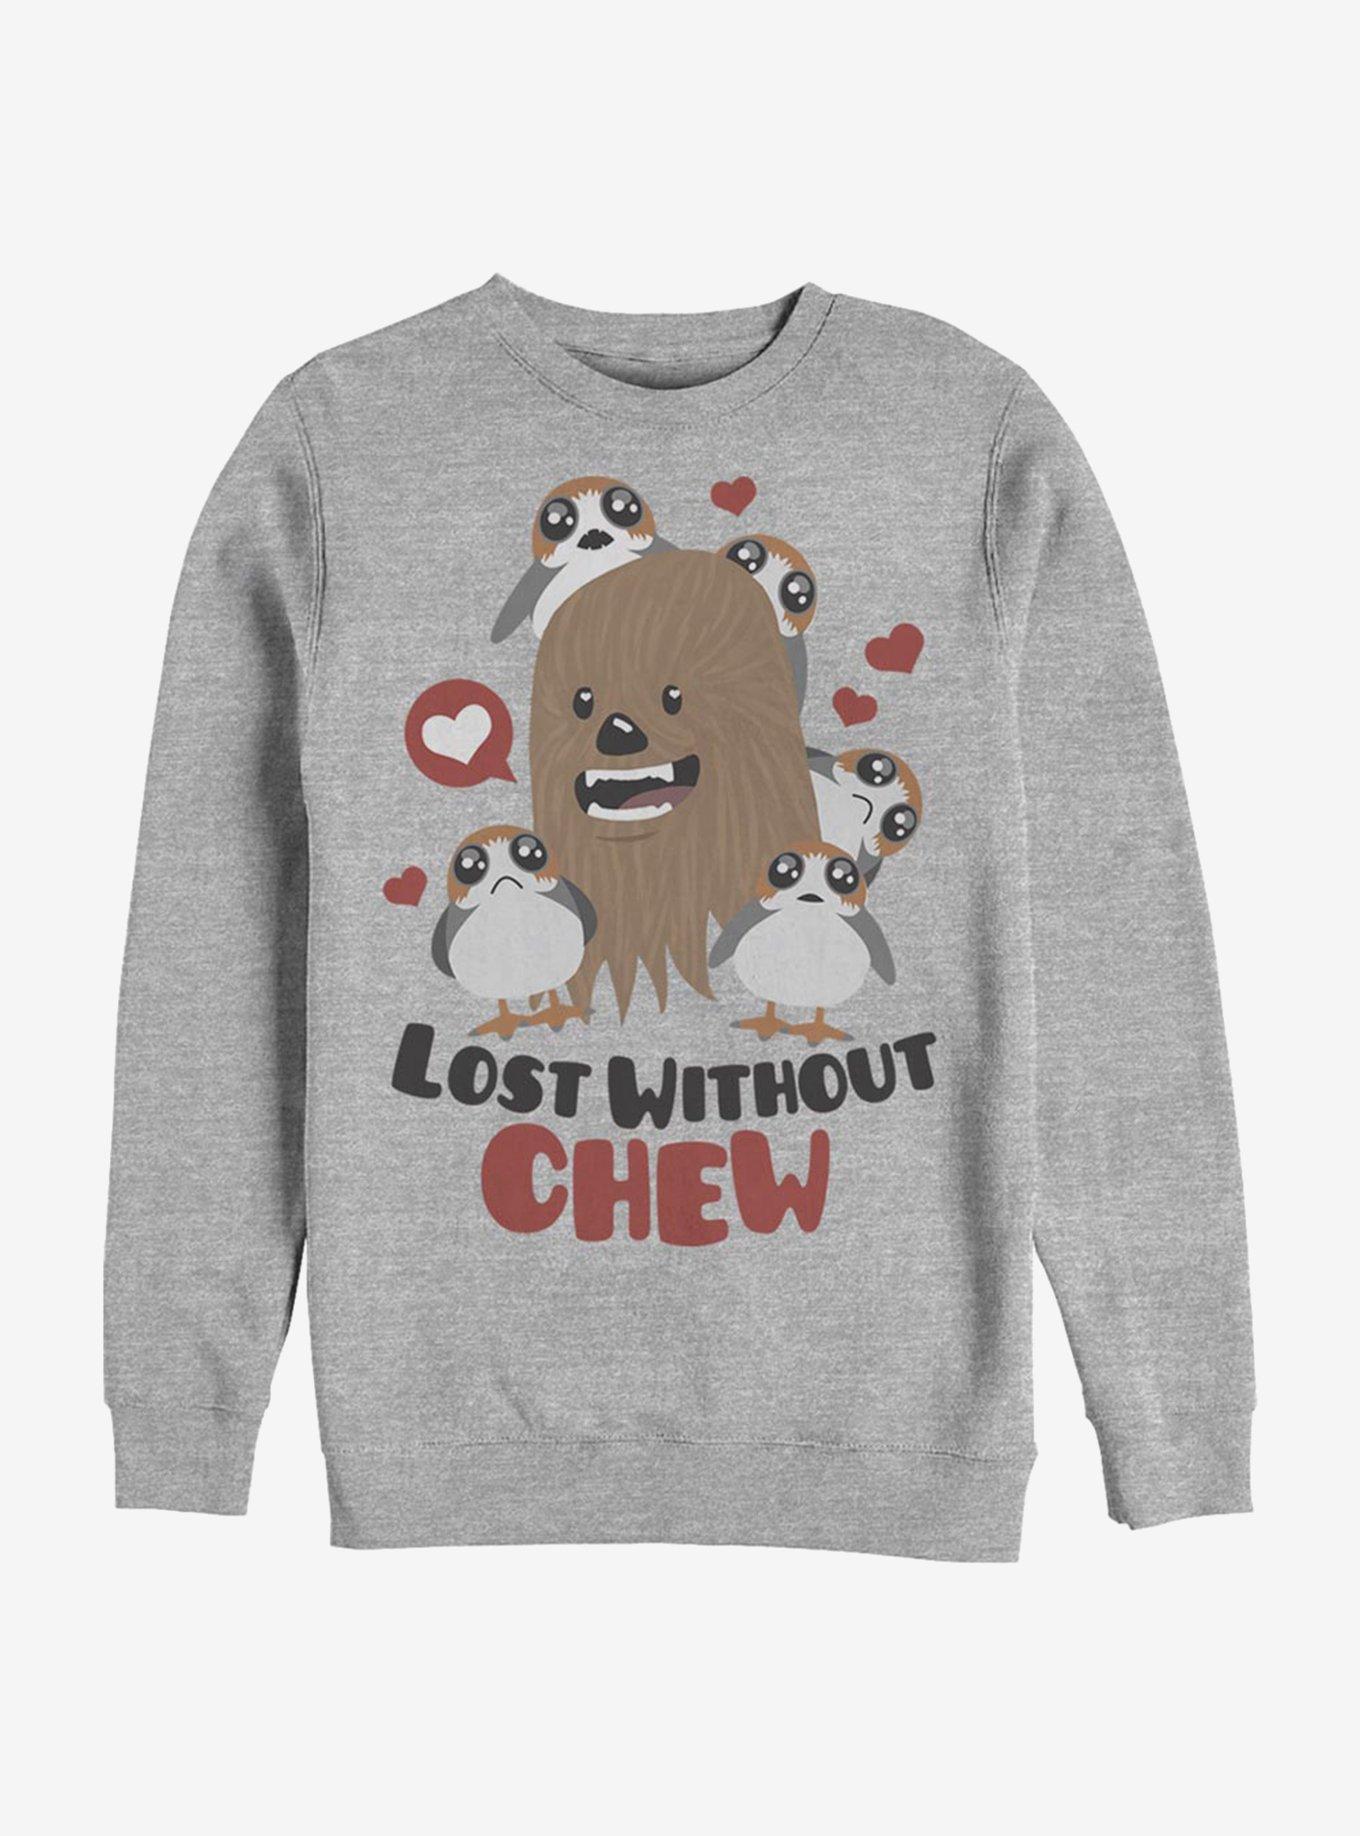 Star Wars Episode VIII The Last Jedi Lost Without Chew Sweatshirt, ATH HTR, hi-res